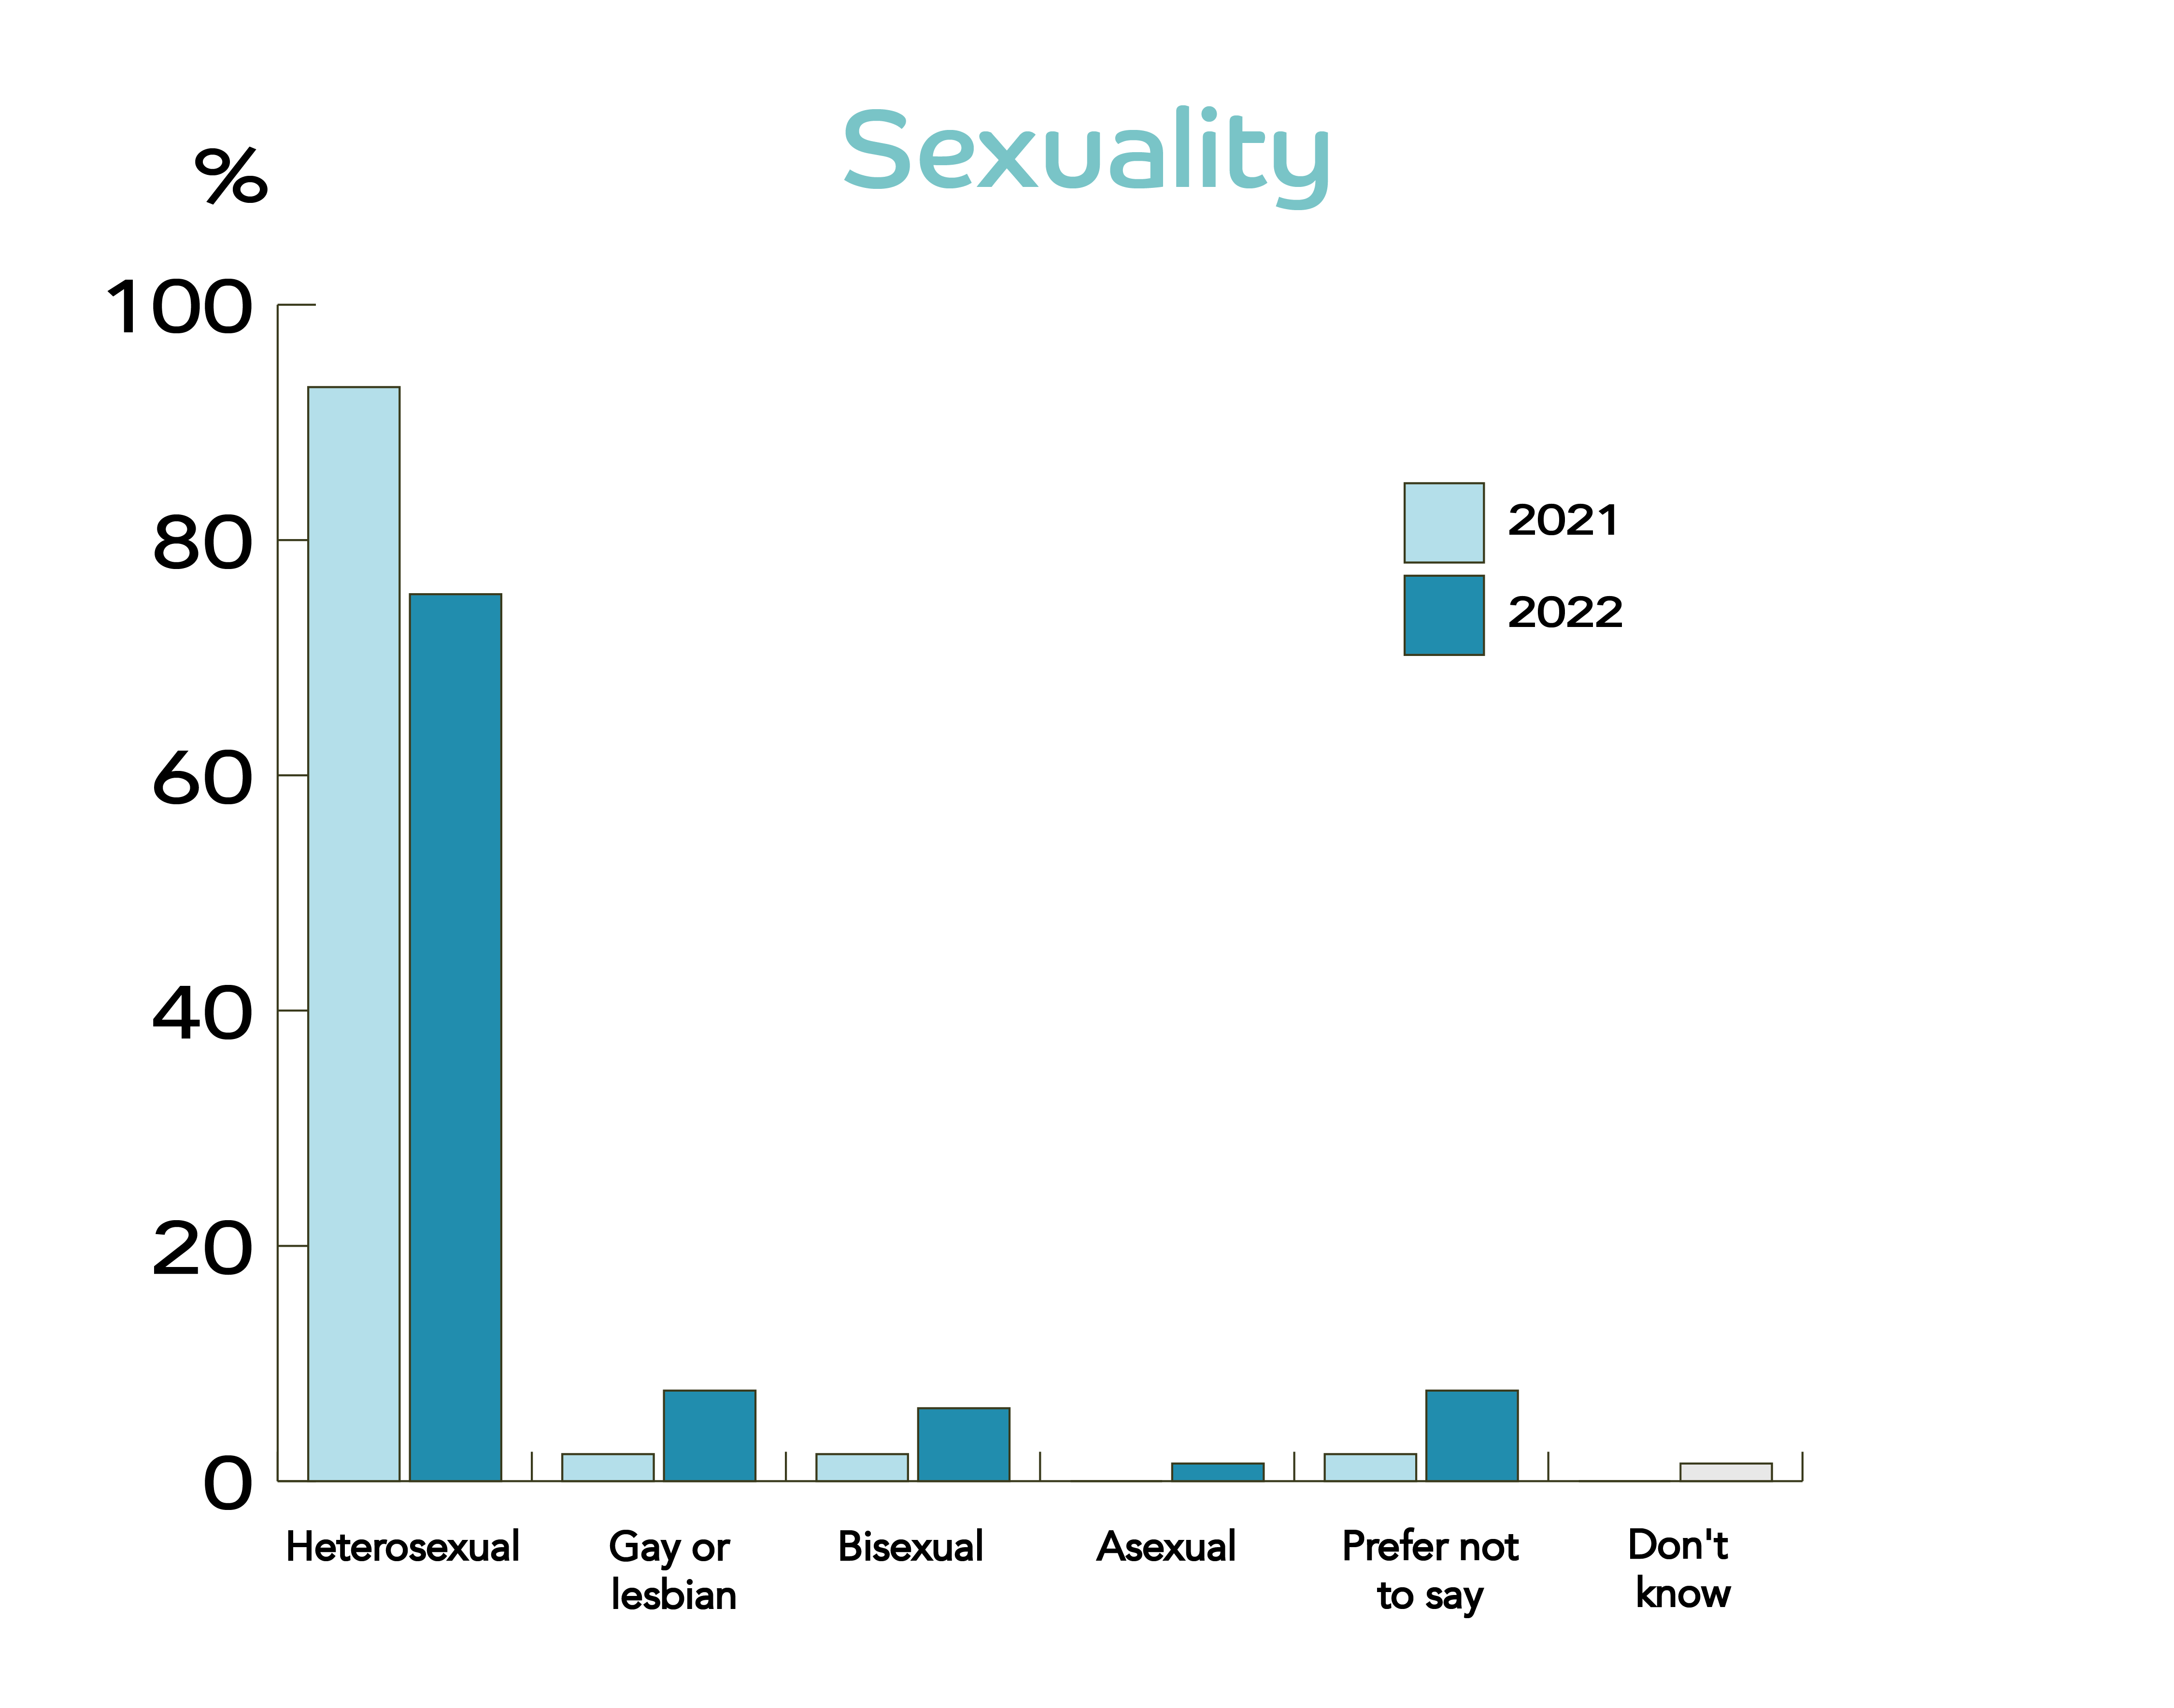 Bar chart showing survey responses to 'Sexuality'